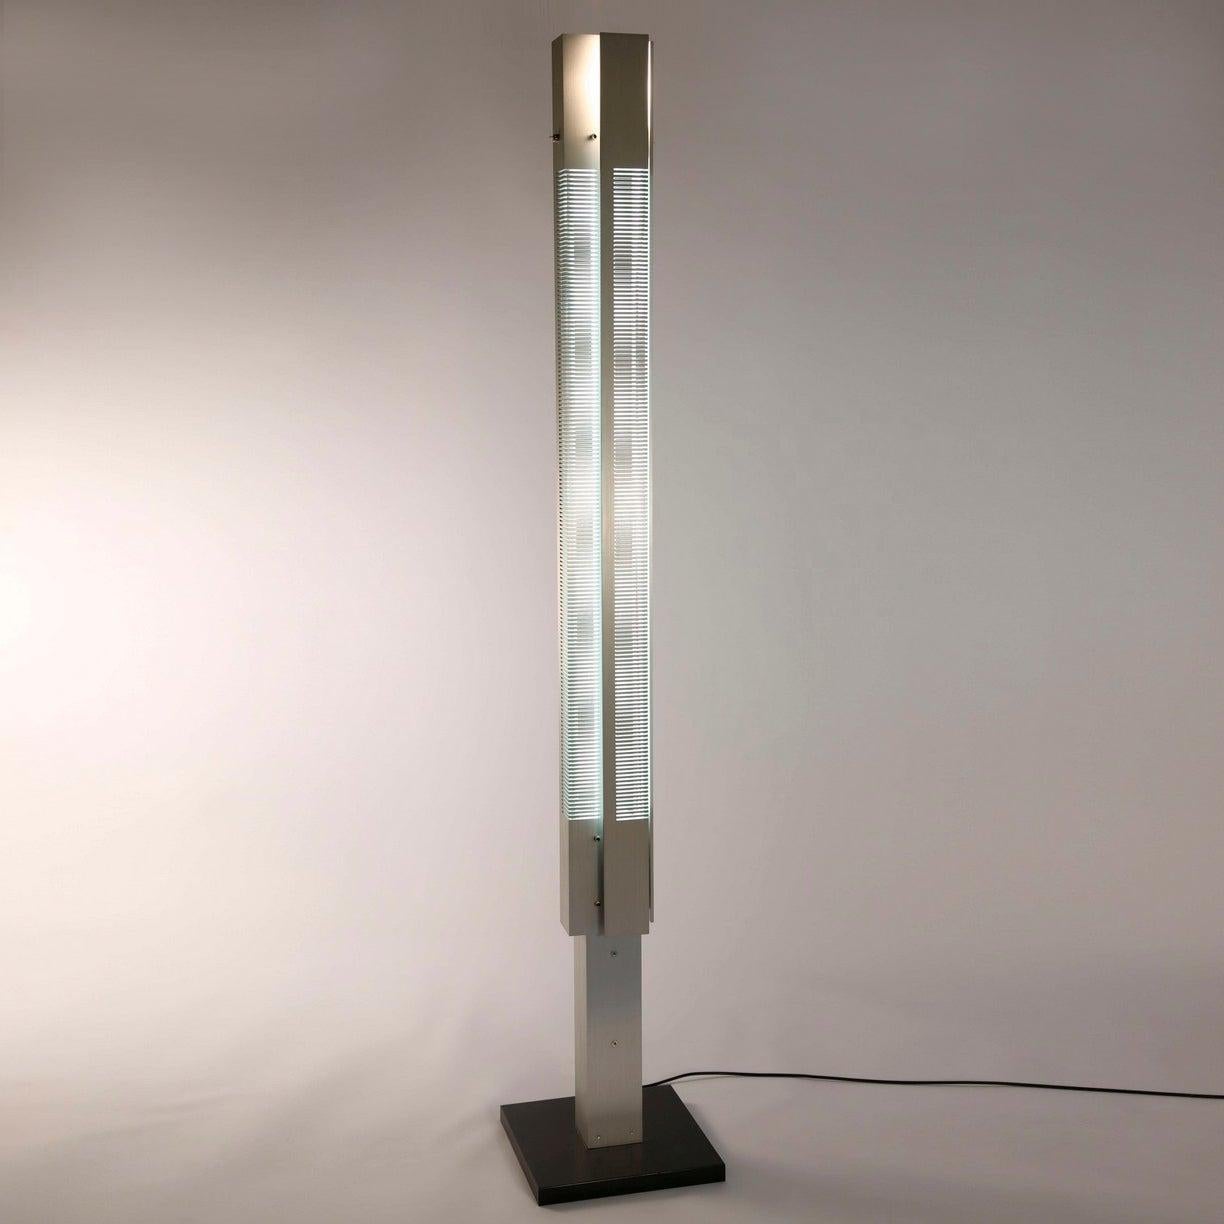 Floor lamp model 'Medium Signal Column Lamp' designed by Serge Mouille in 1962.

Manufactured by Editions Serge Mouille in France. The production of lamps, wall lights and floor lamps are manufactured using craftsman’s techniques with the same